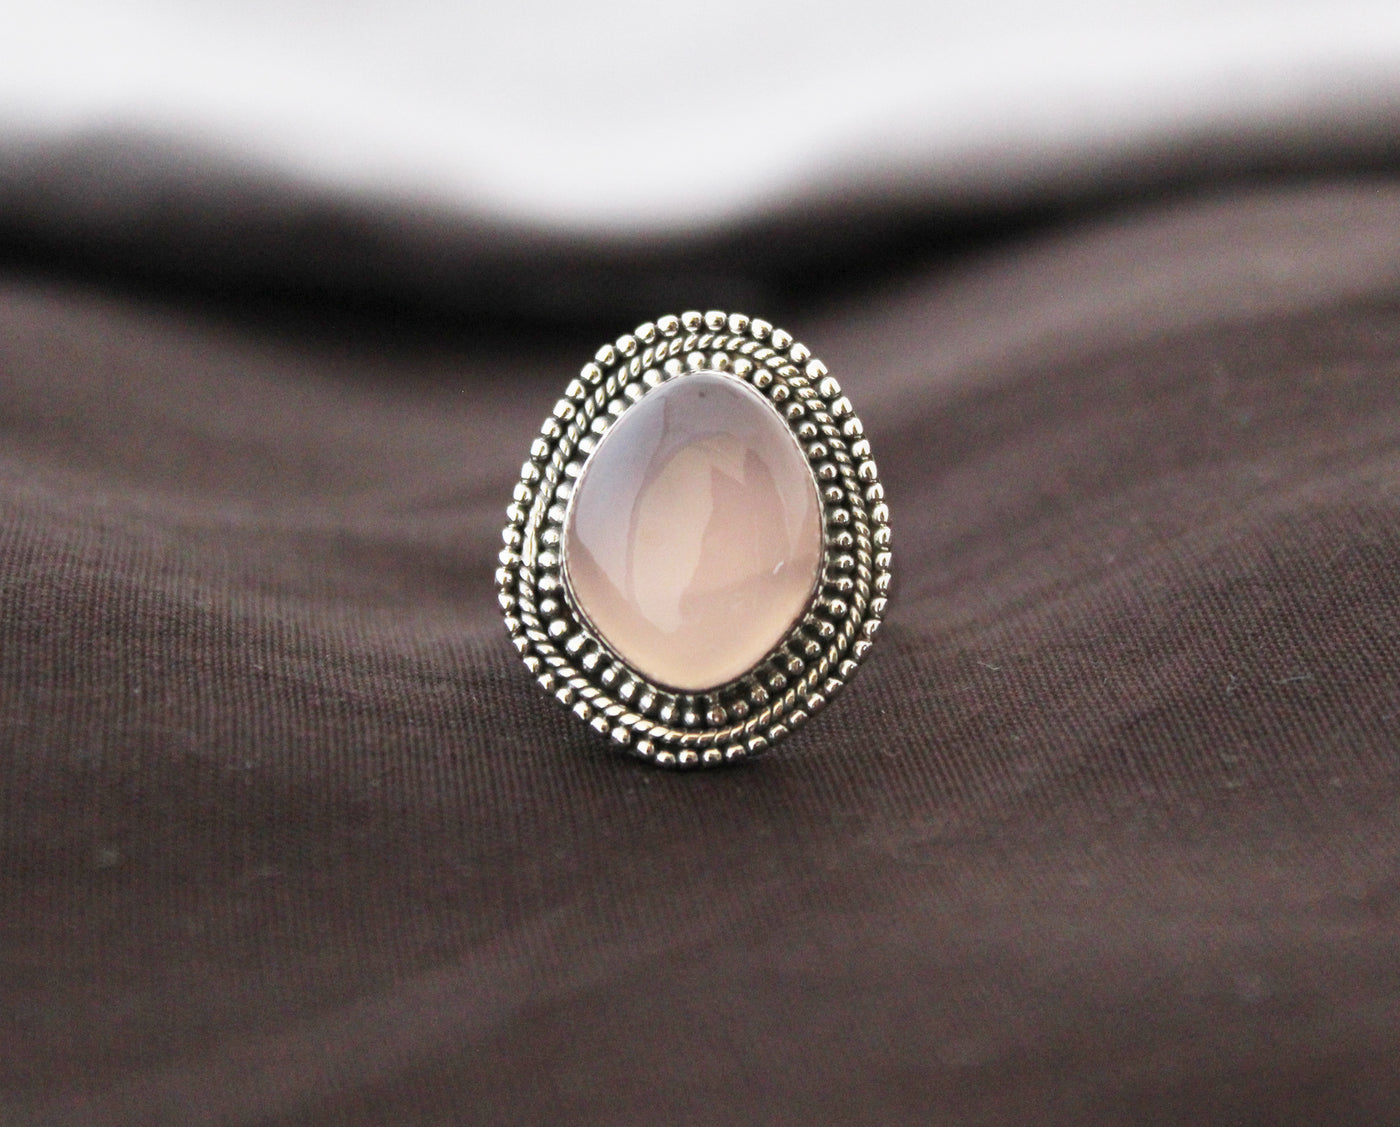 Pink Chalcedony Ring